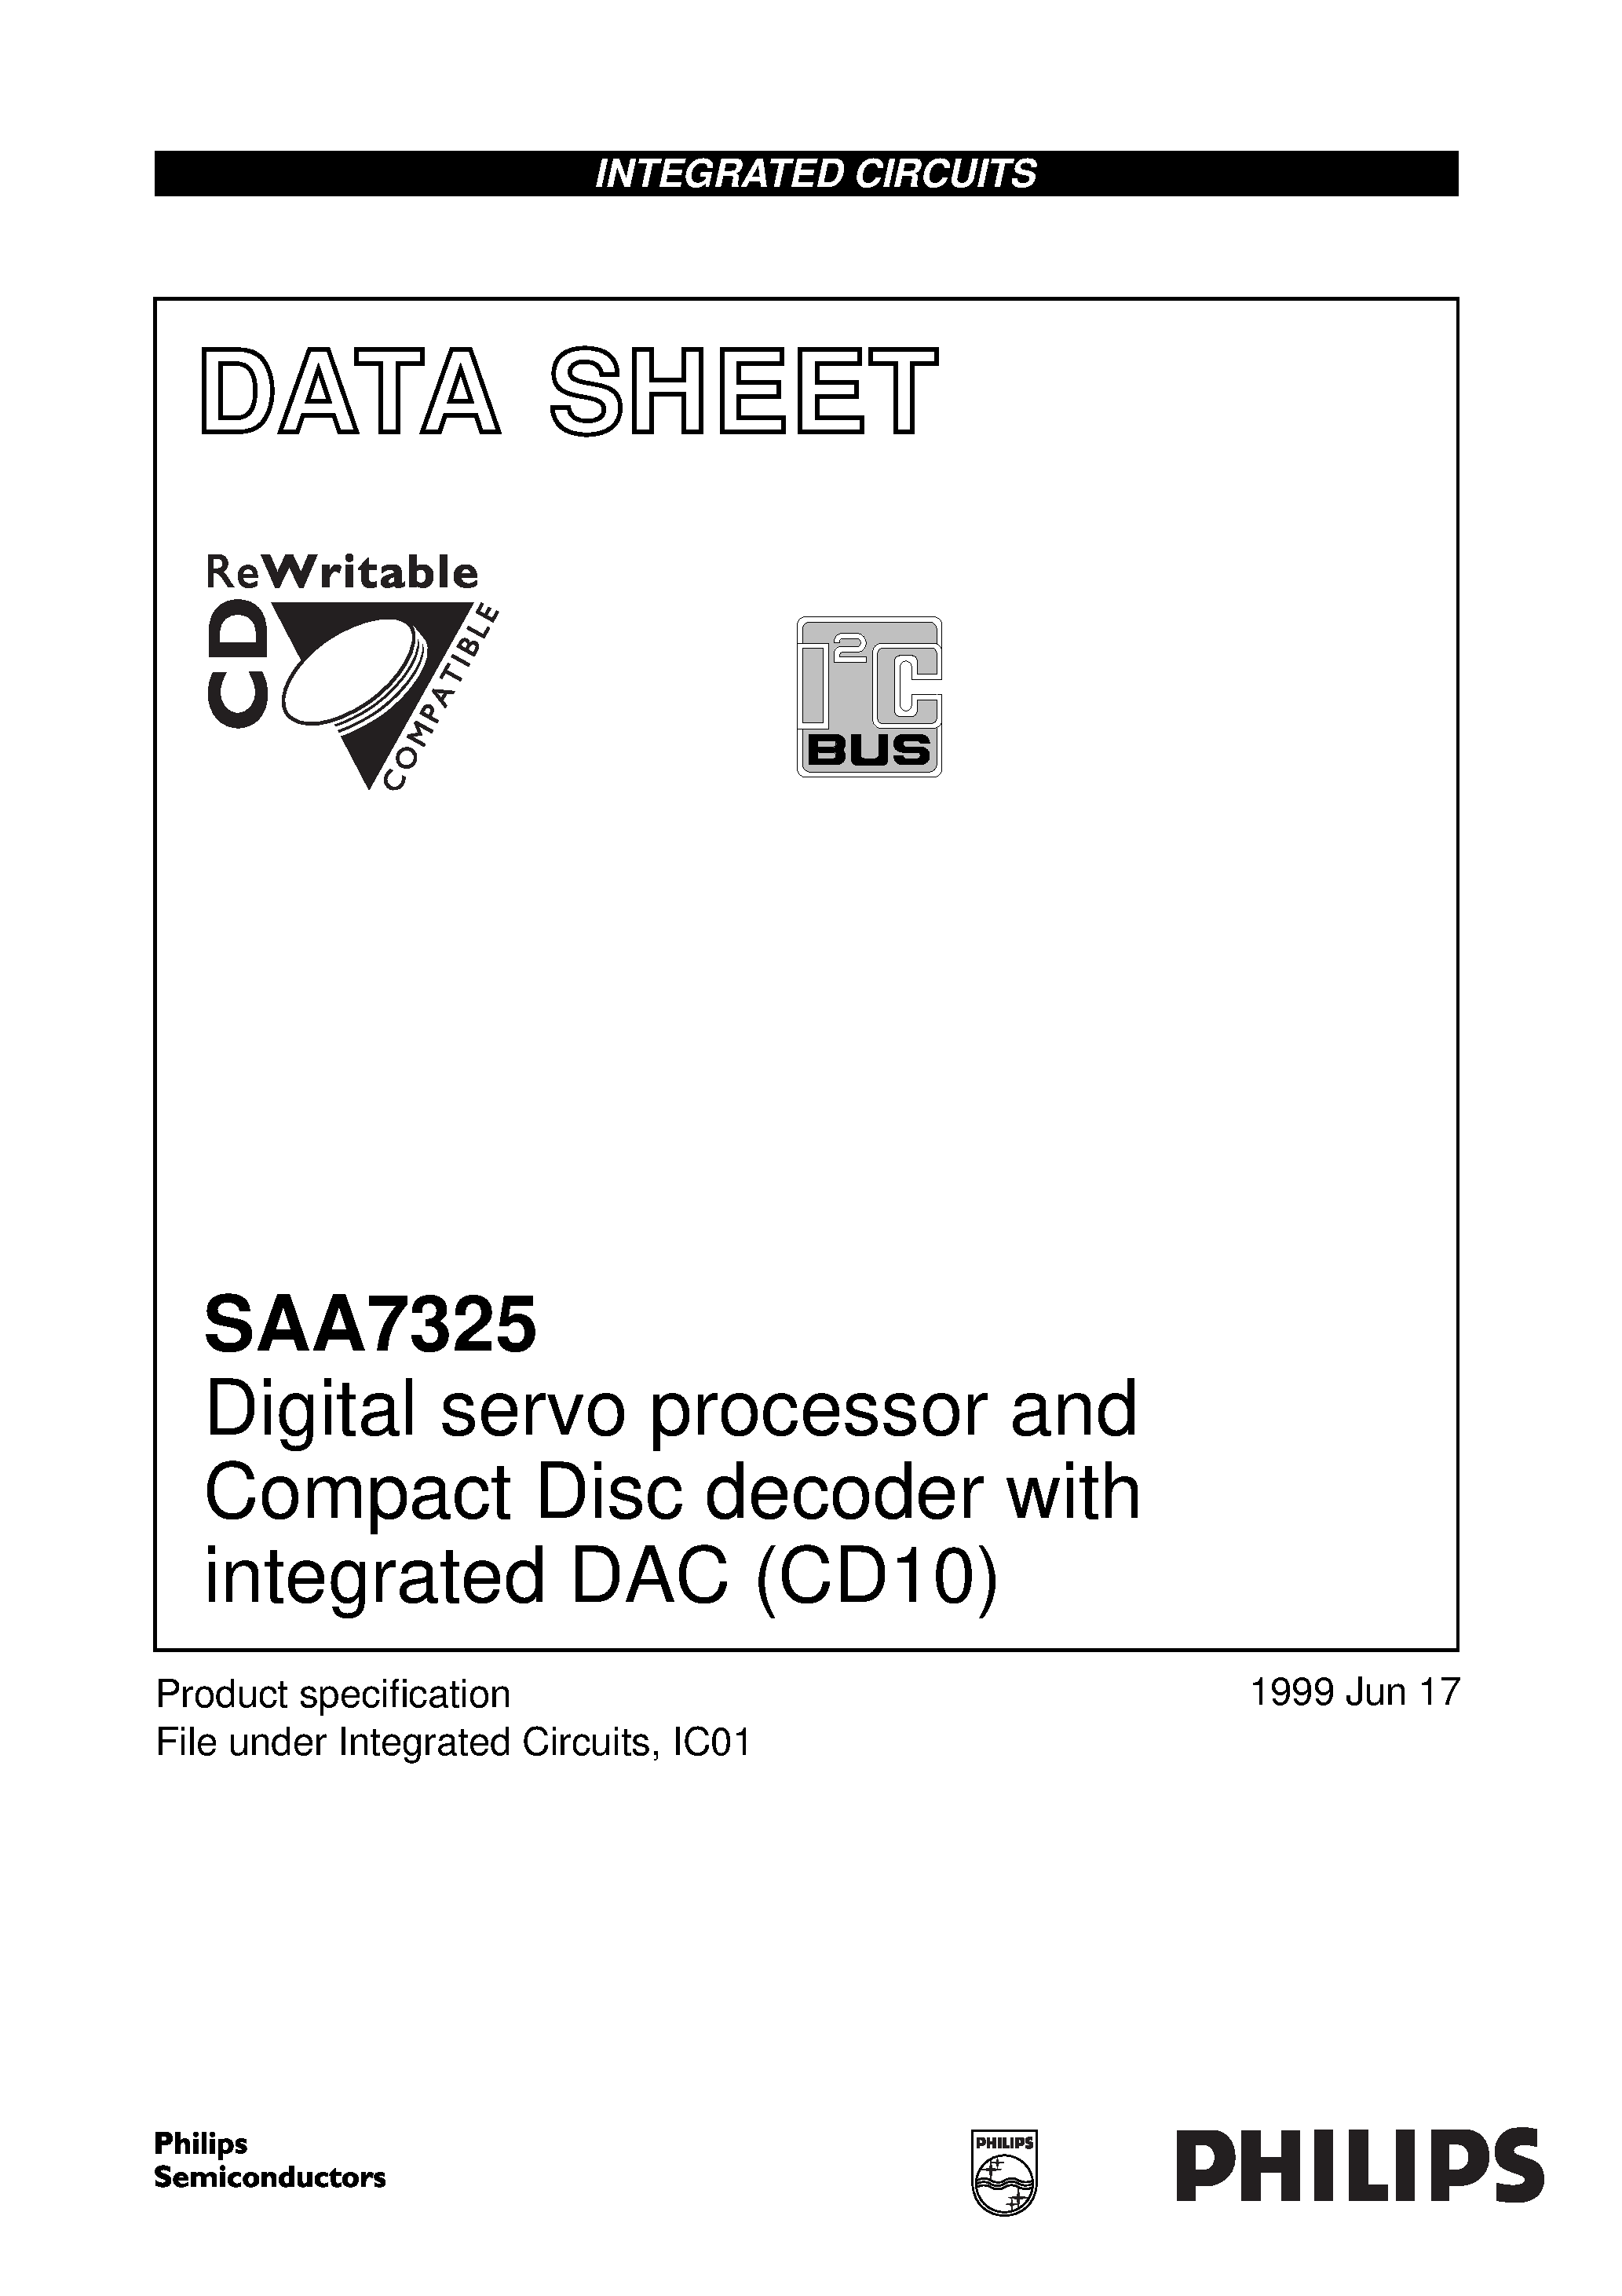 Datasheet SAA7325 - Digital servo processor and Compact Disc decoder with integrated DAC CD10 page 1